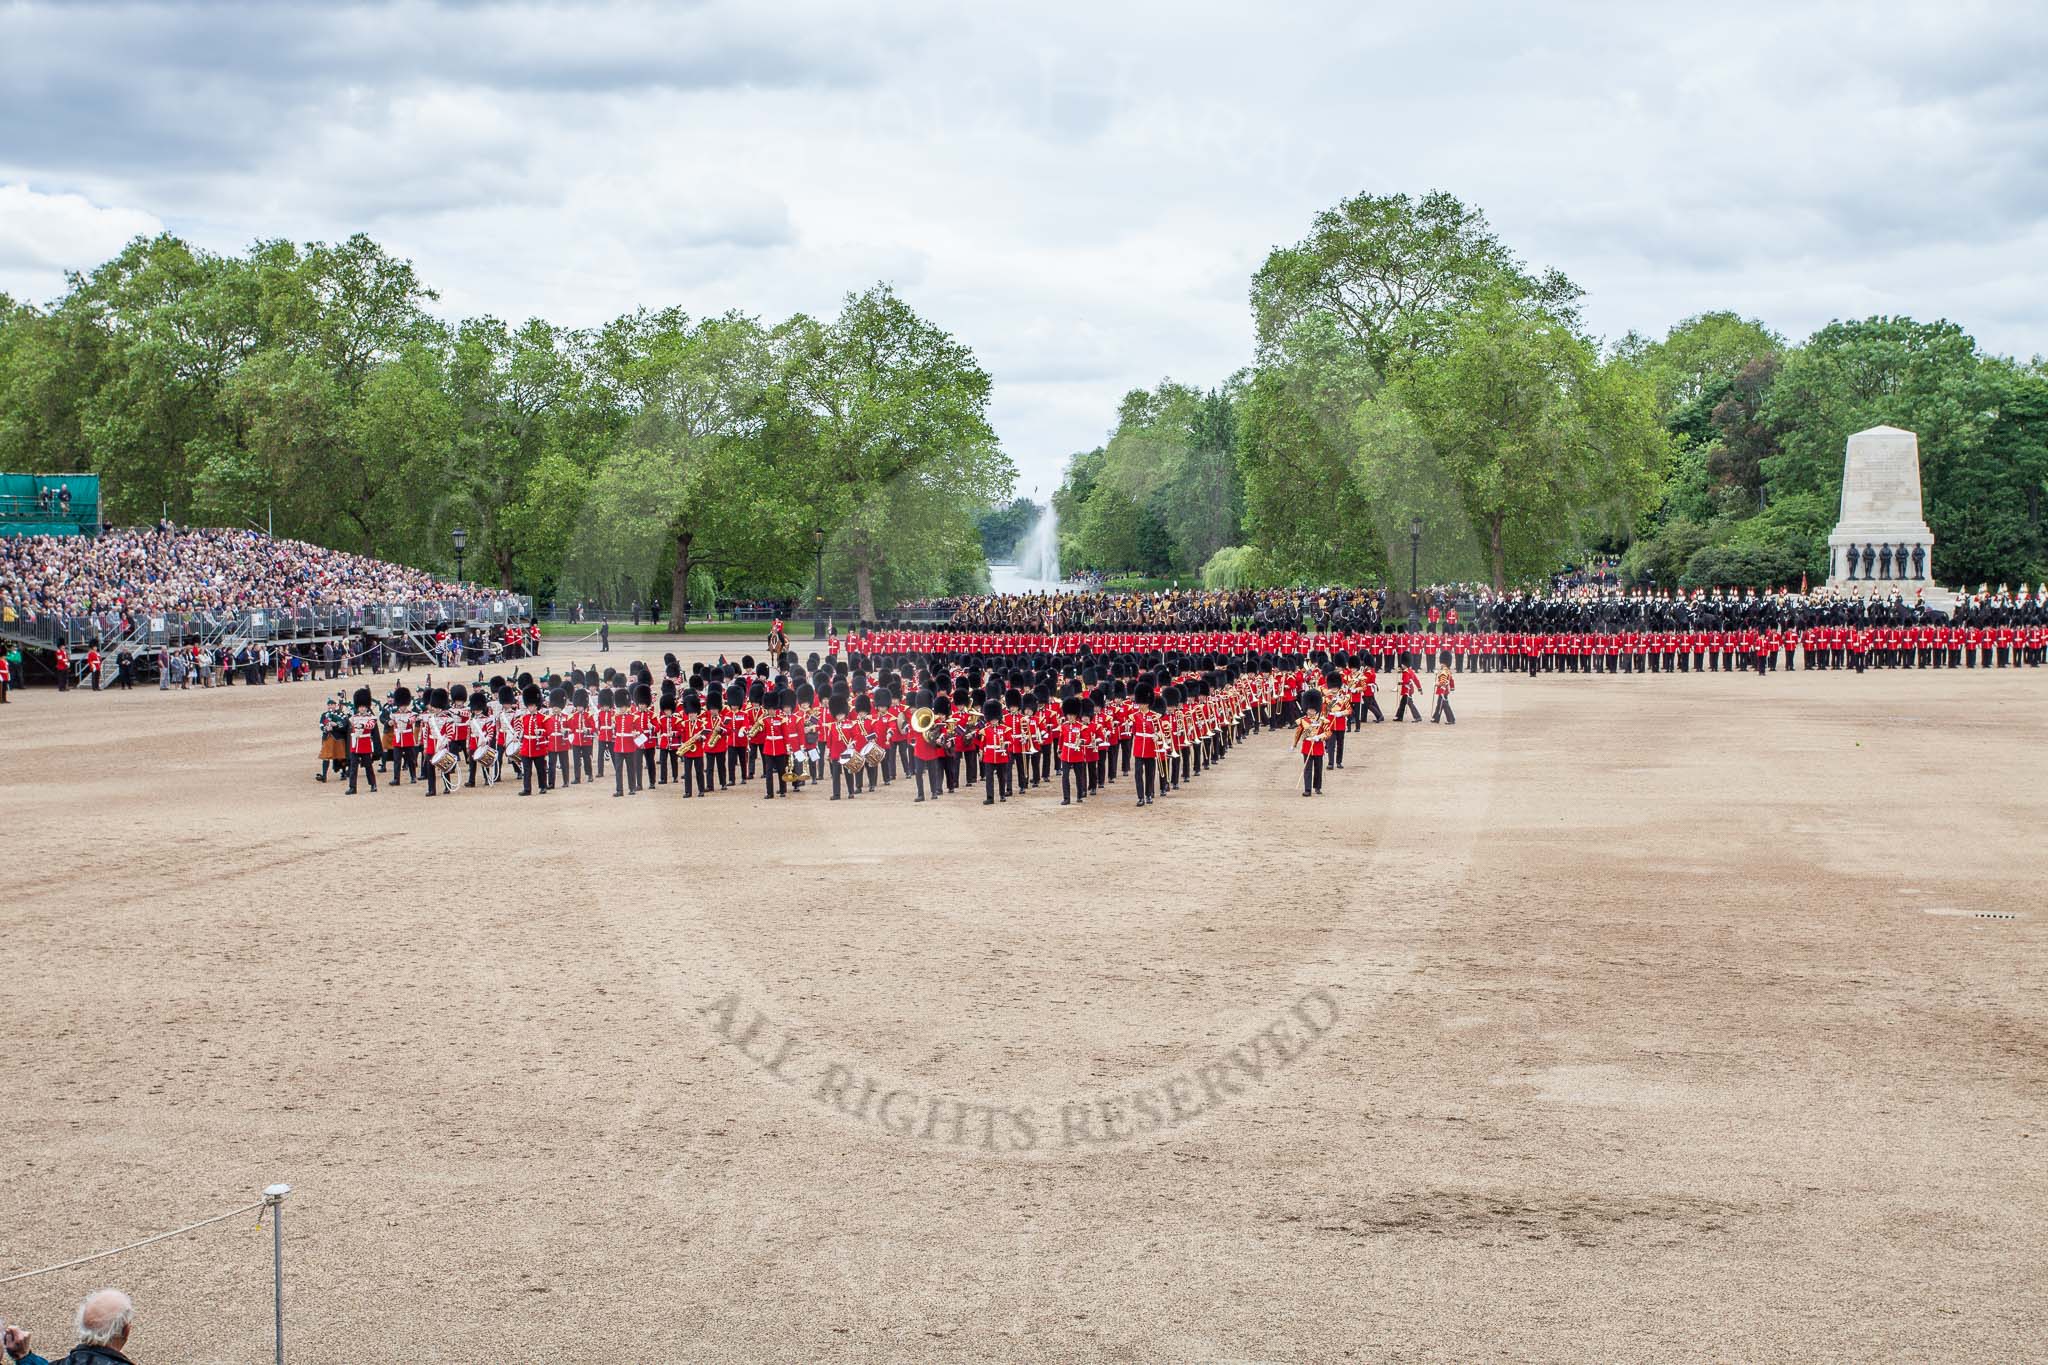 The Colonel's Review 2012: The Massed Bands are moving from the centre of Horse Guards Parade towards their initial position on the western side..
Horse Guards Parade, Westminster,
London SW1,

United Kingdom,
on 09 June 2012 at 11:49, image #374